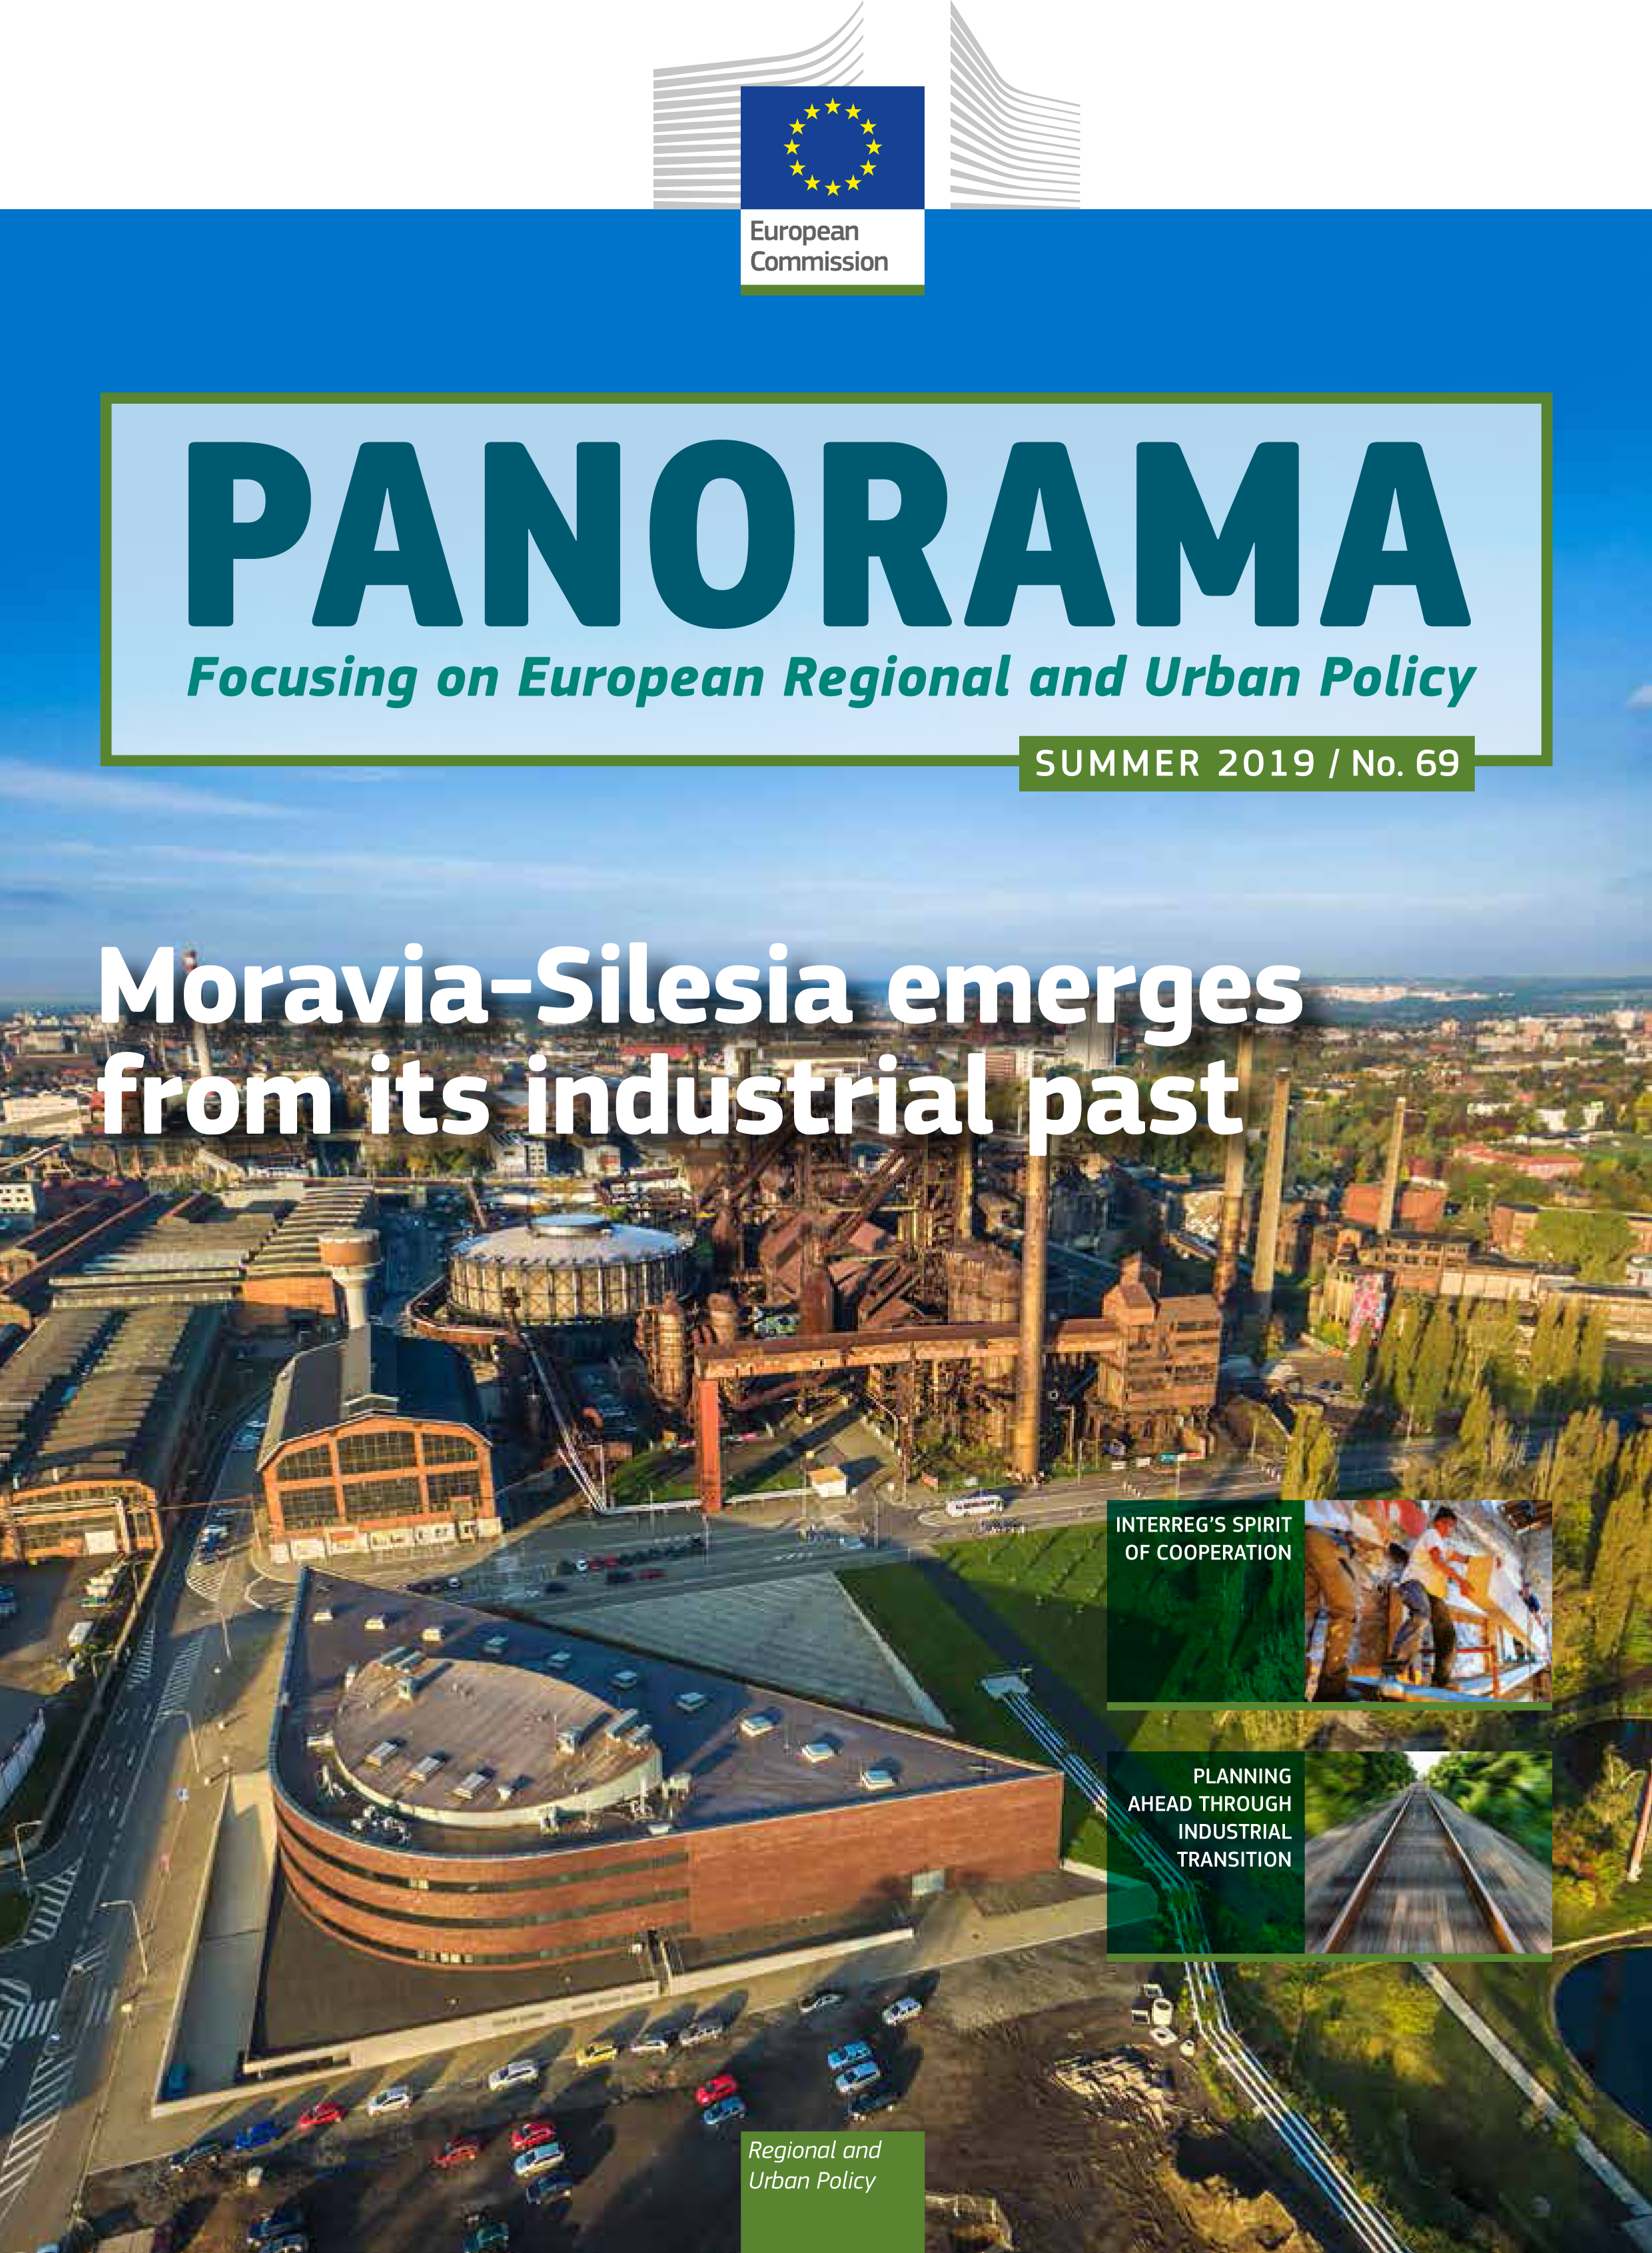 Panorama 69: Moravia-Silesia emerges from its industrial past